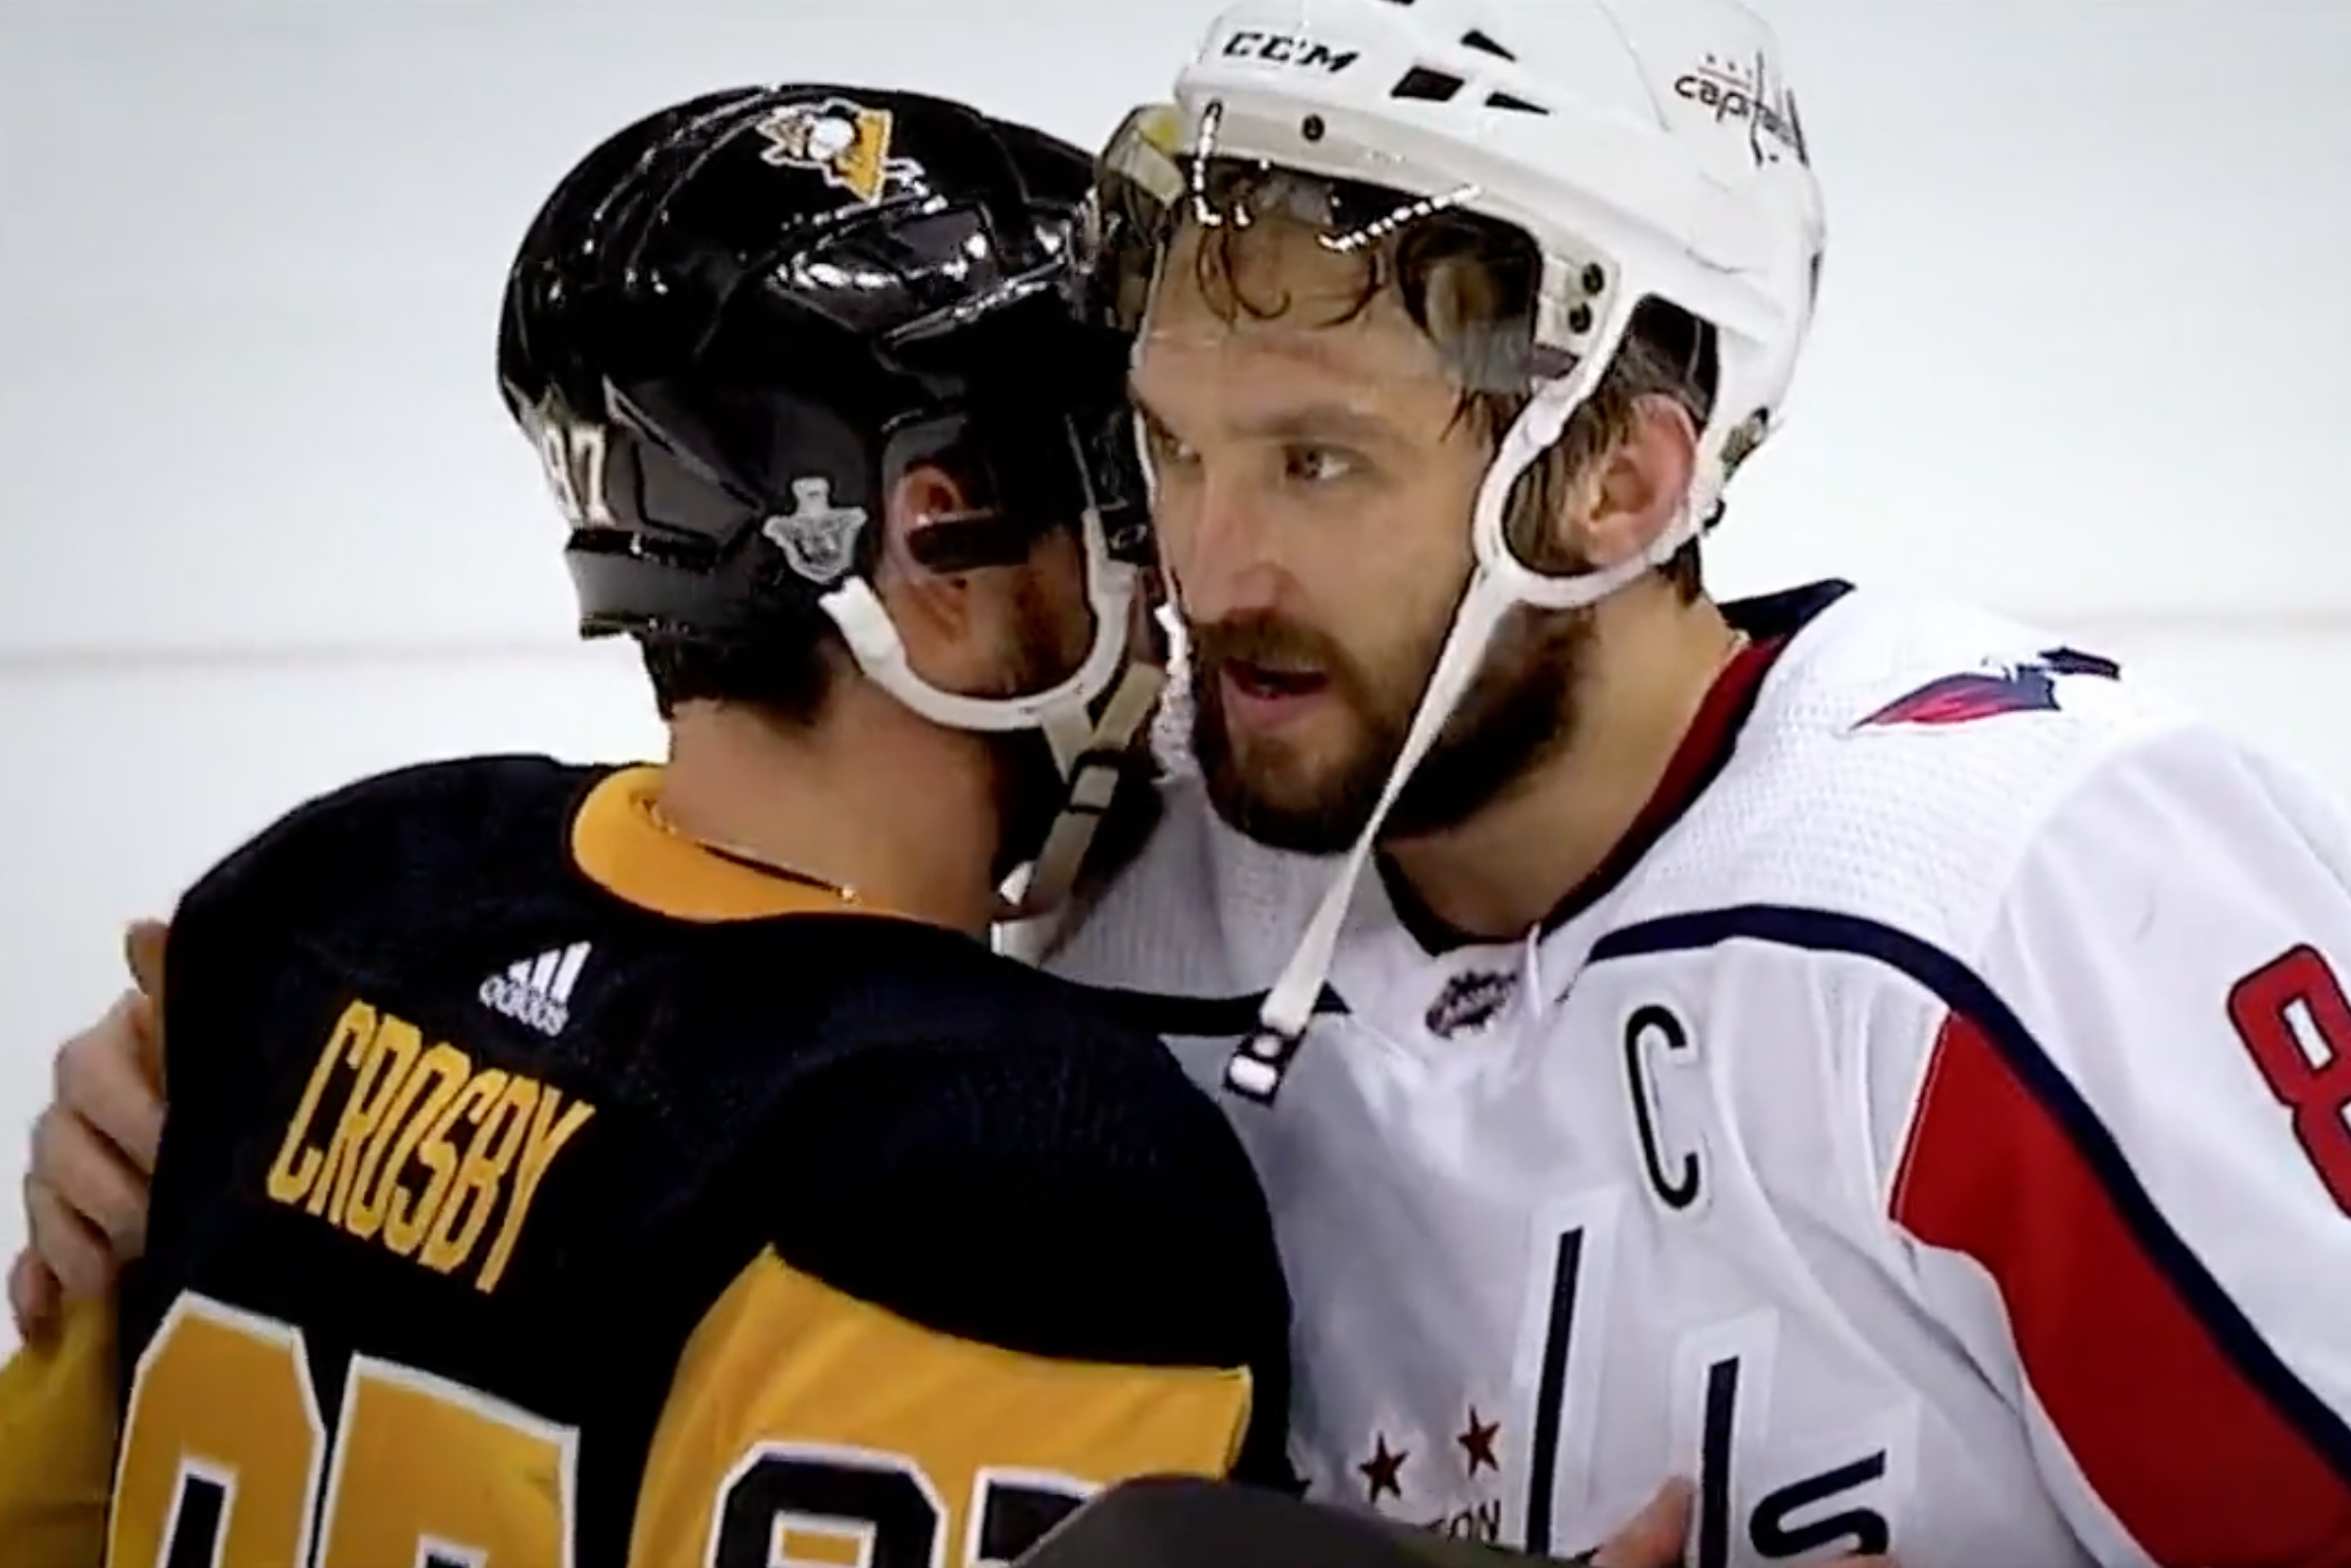 Capitals Alex Ovechkin and Penguins Sidney Crosby